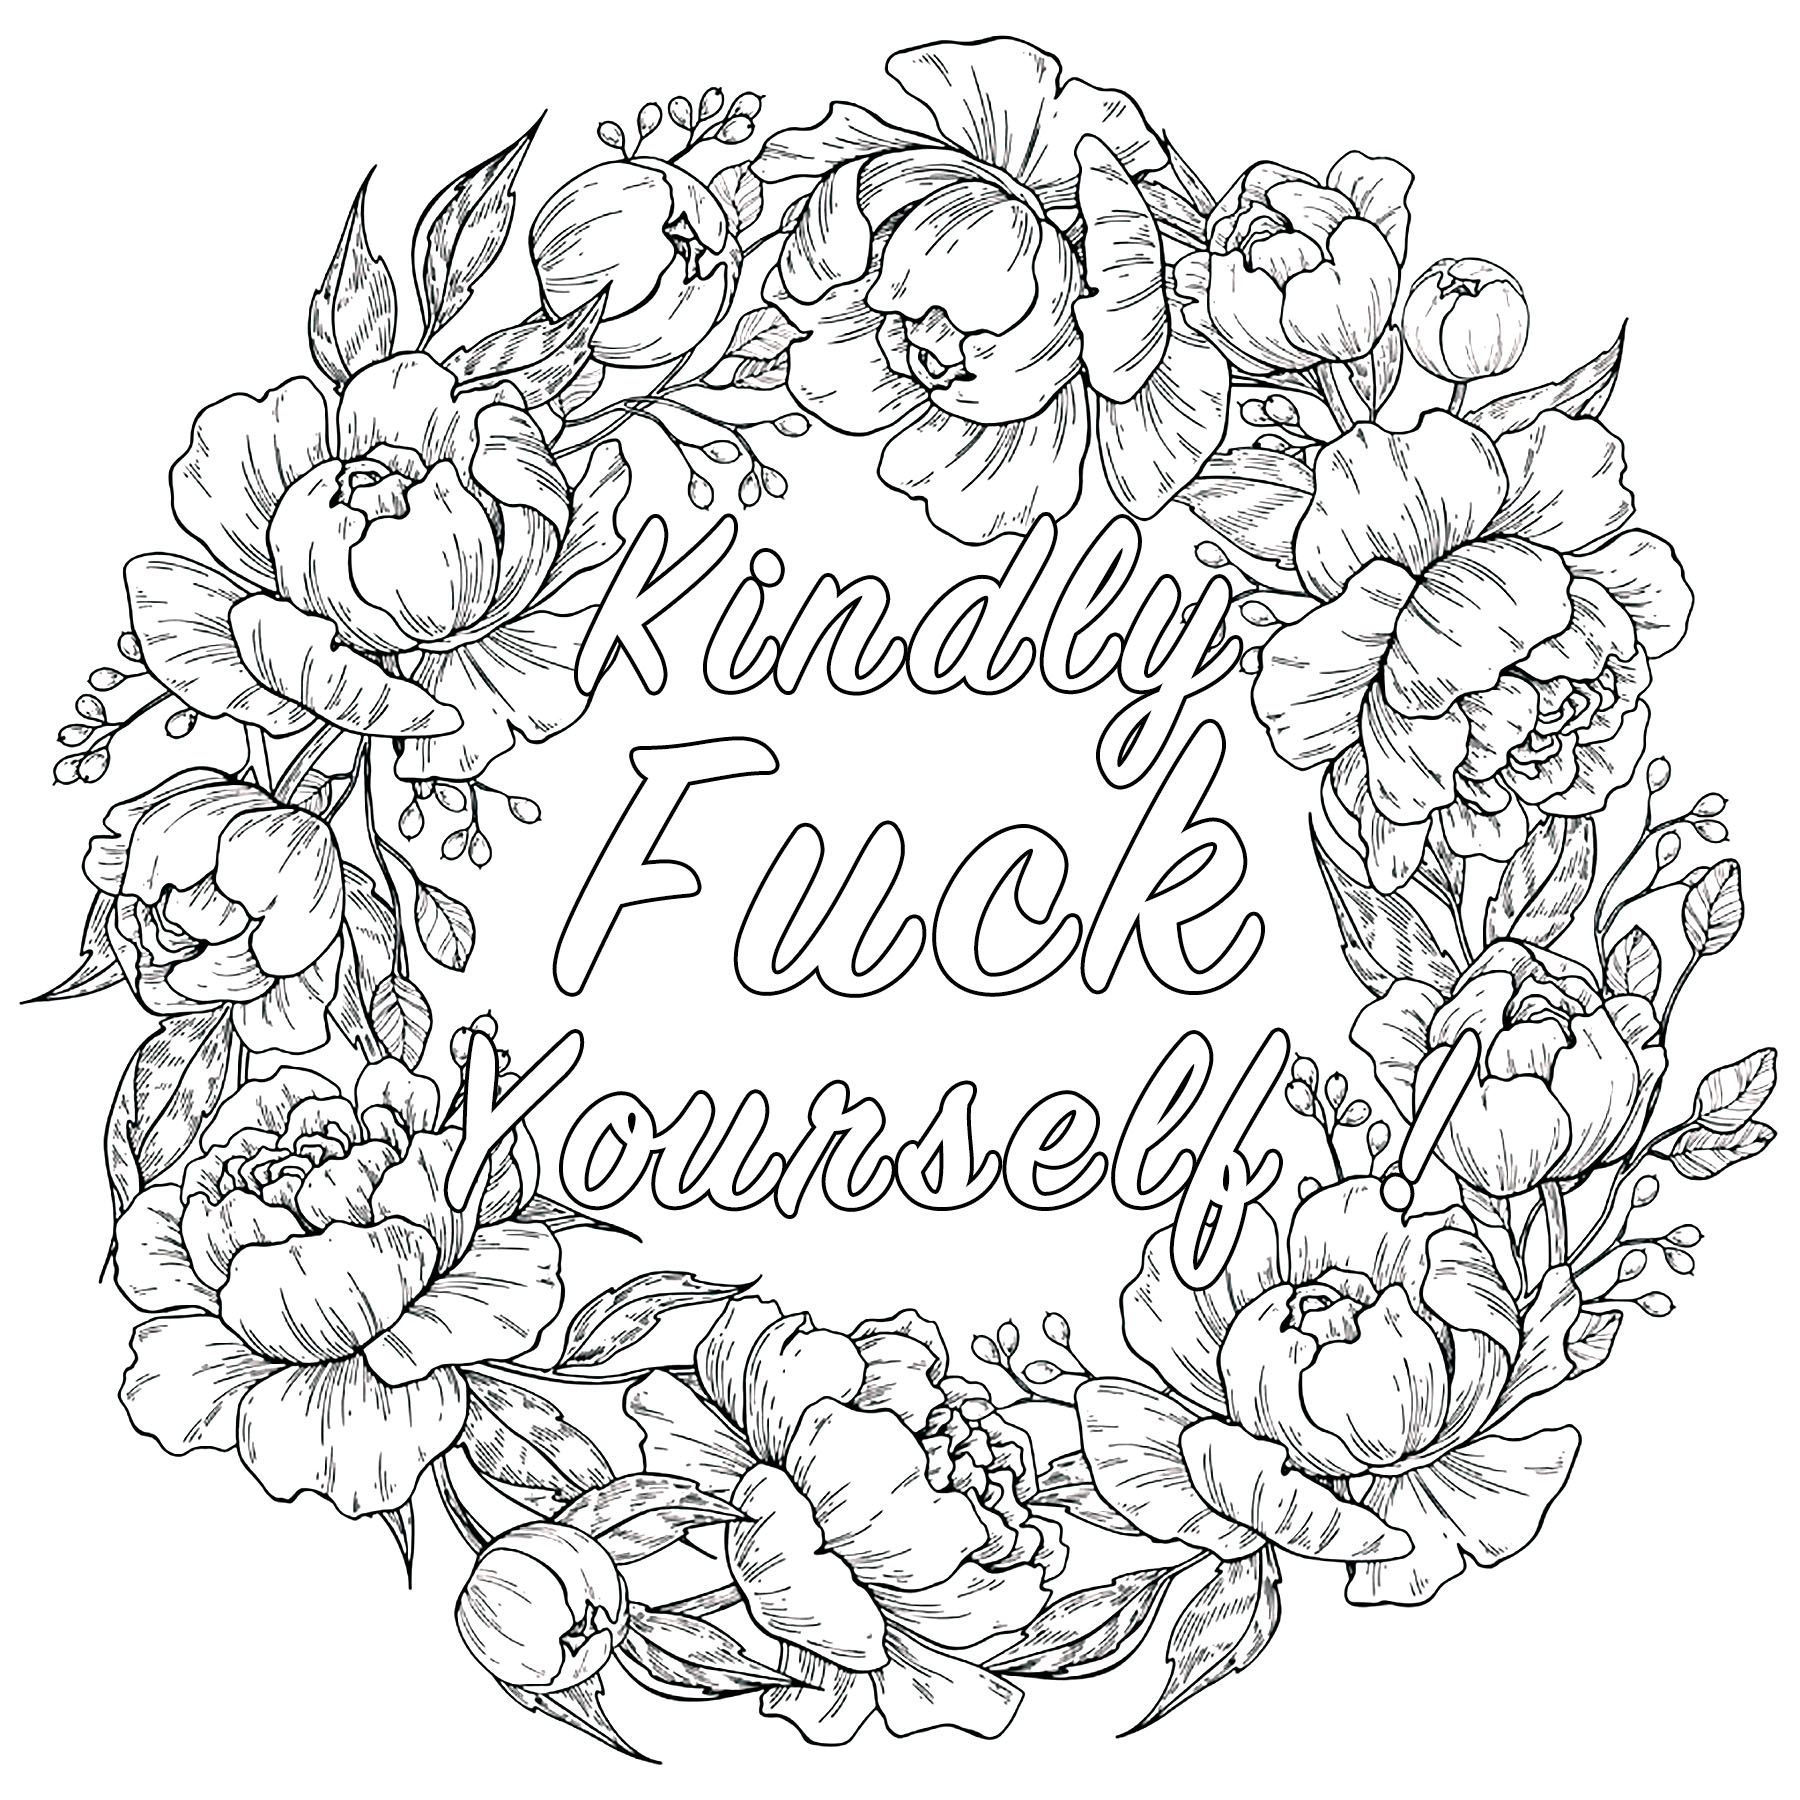 Kindly Fuck Yourself Swear Word Coloring Page Swear Word